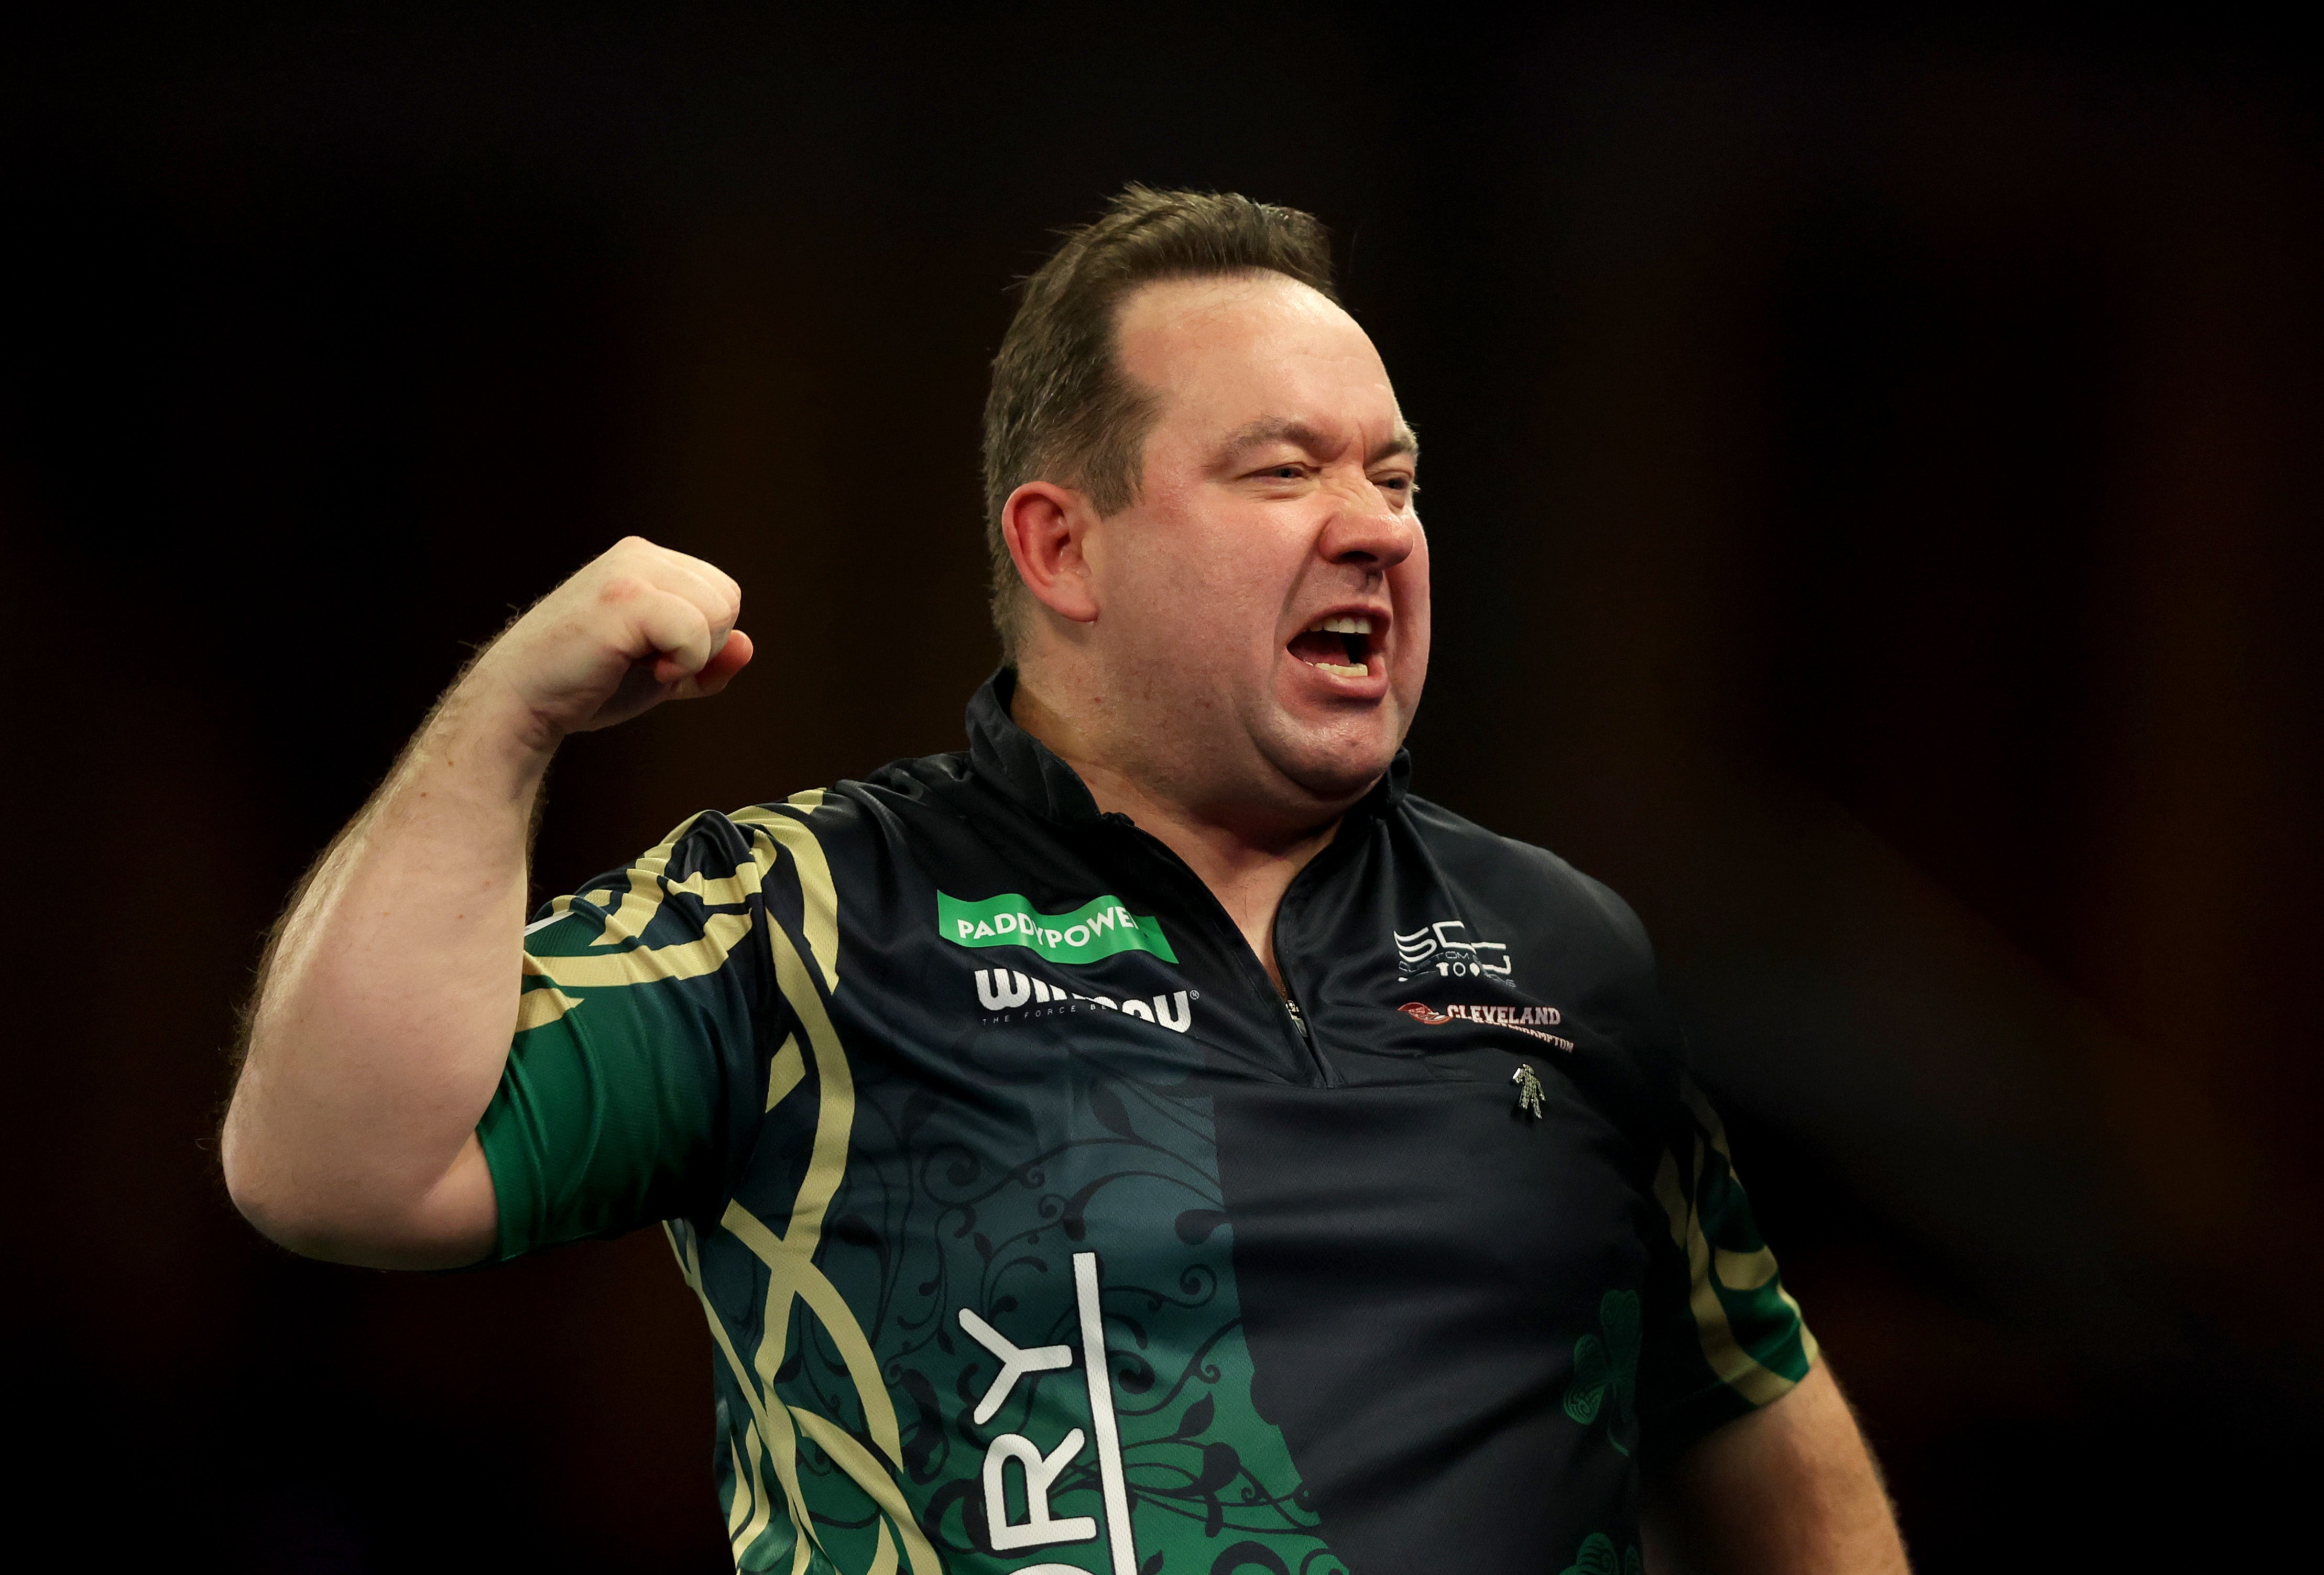 Brendan Dolan celebrated one of the biggest wins of his career